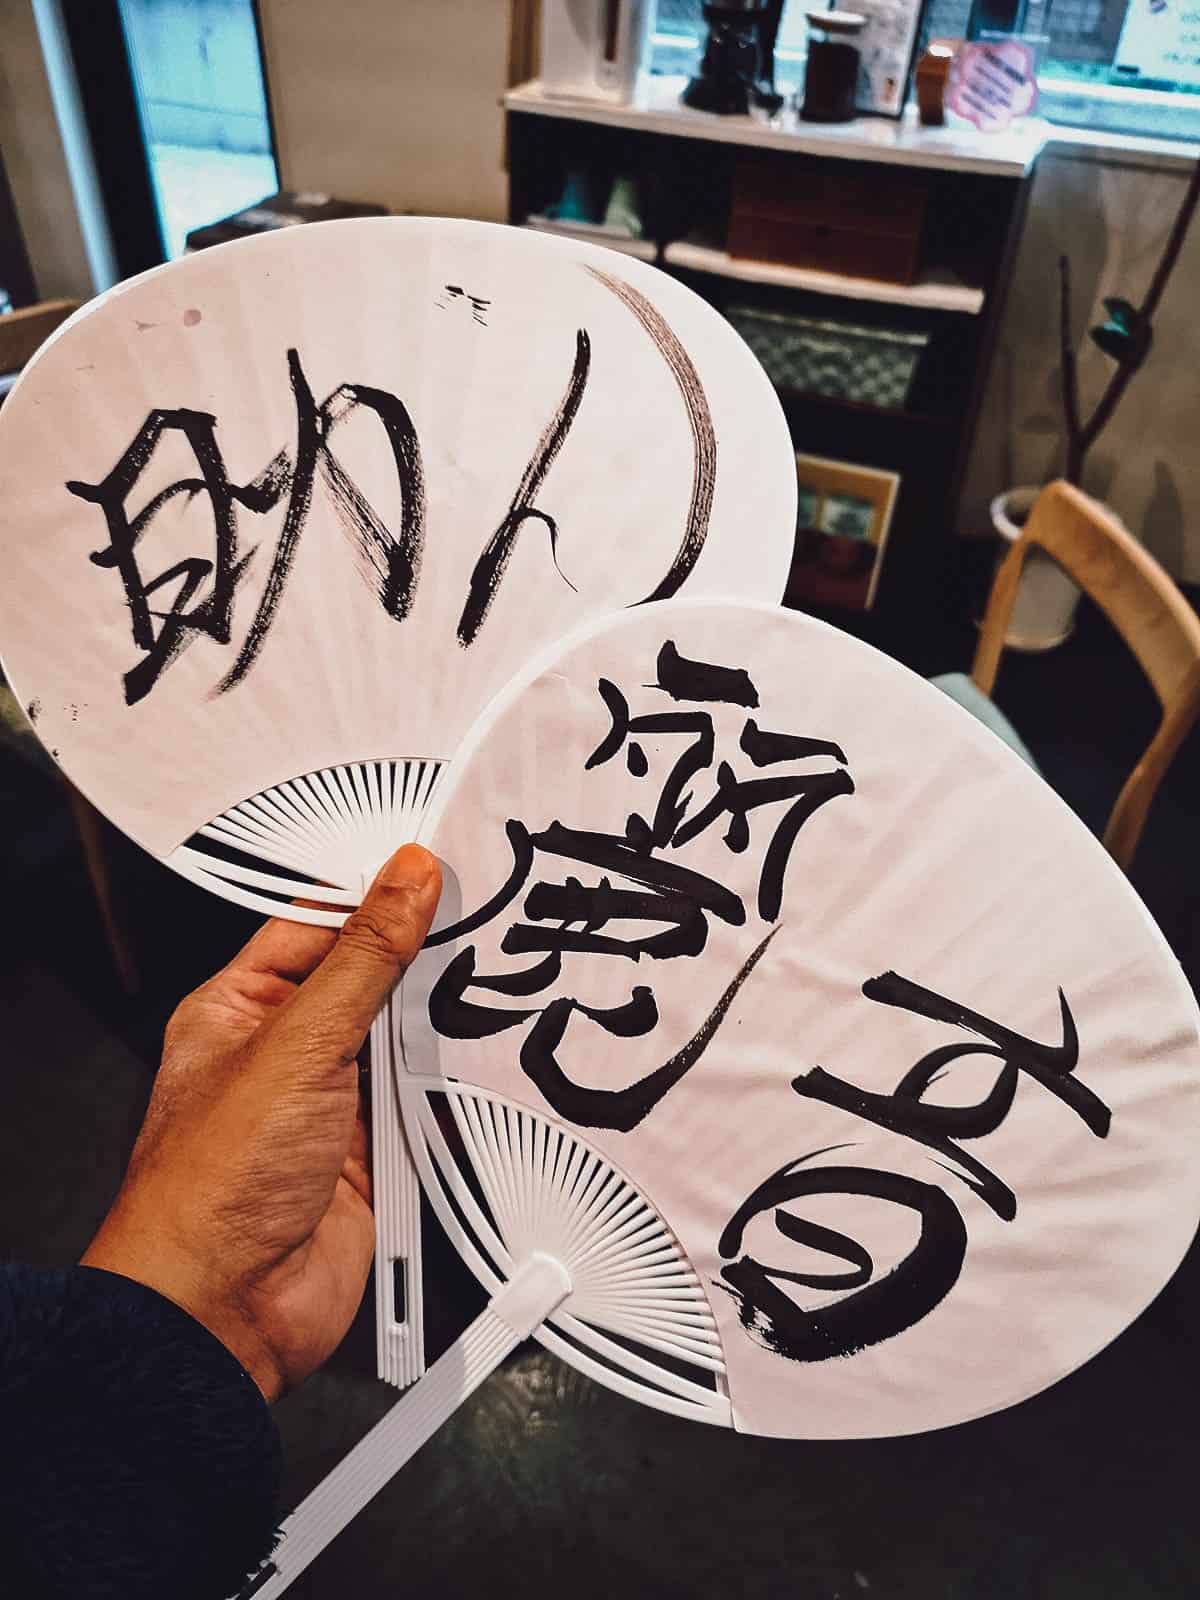 Fans with kanji